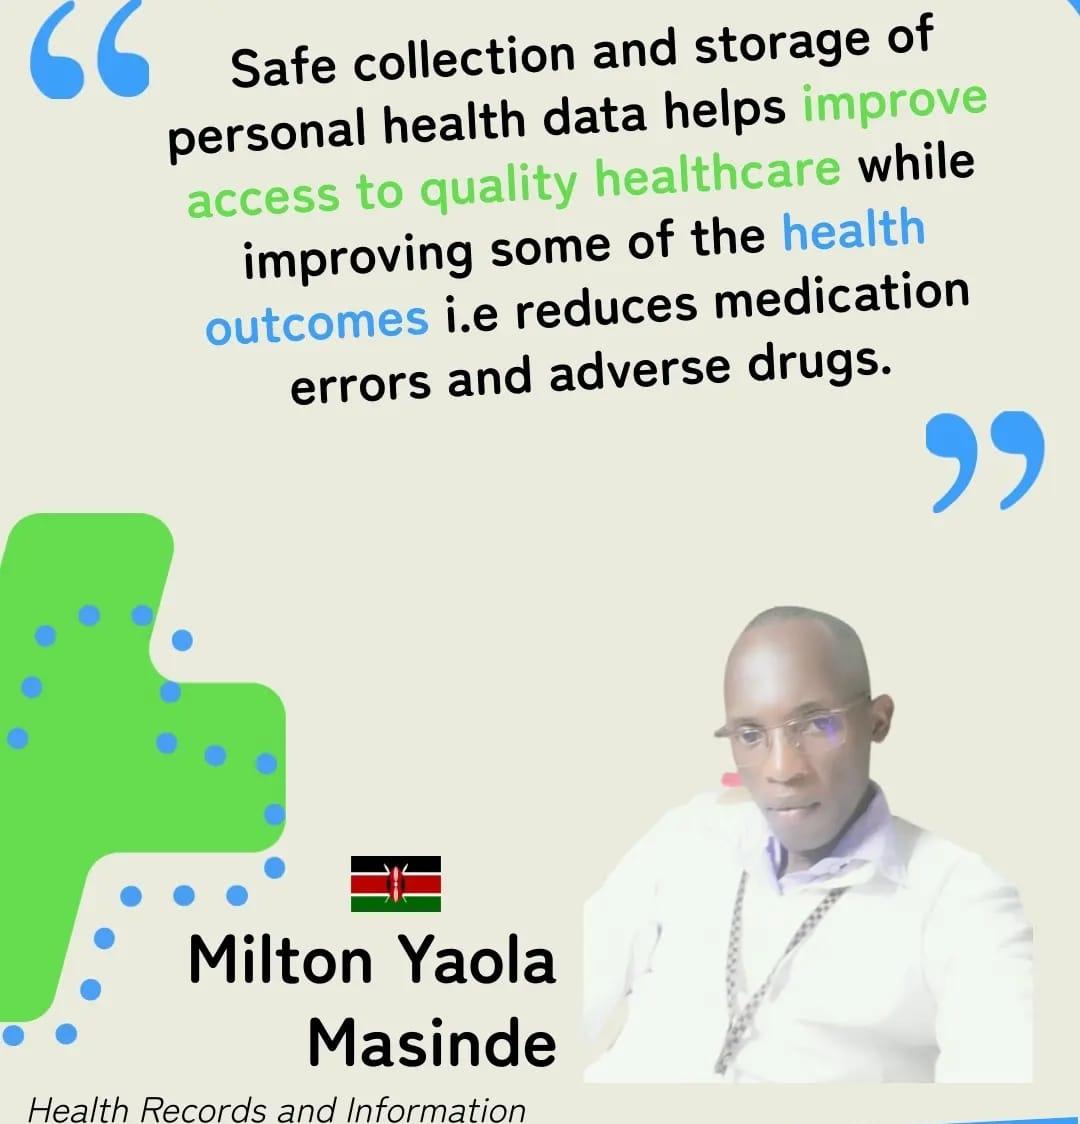 Meet Milton Masinde, an HRI officer who emphasizes on safe collection and storage of personal health data.  Confidentiality has been a consumer's concern on digital health. Safe and properly used data improves consumer's confidence in the digital health

|#MydataOurHealthKE|